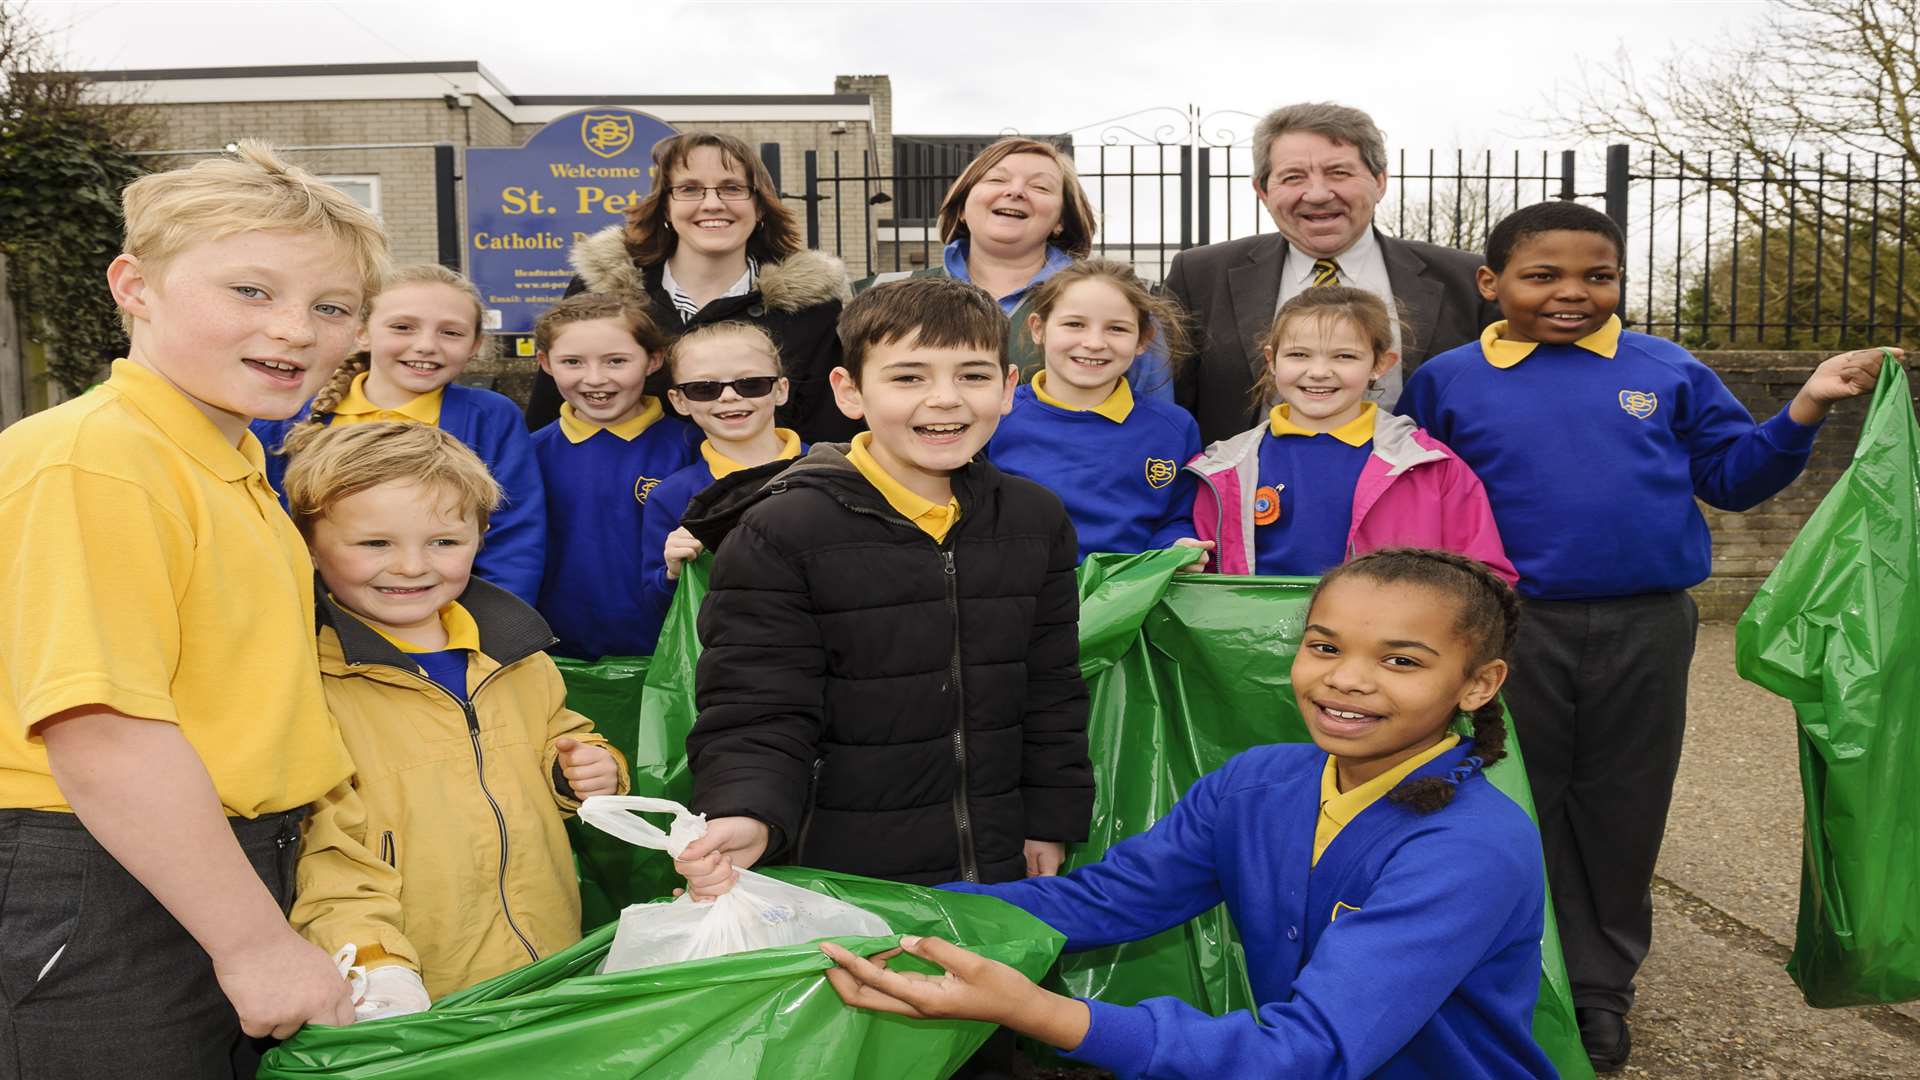 Headteacher Colleen Owen, back centre, with Jess McMahon, left, and Gordon Henderson MP of Litter Angels, with pupils from the school. Launch of the litter walk, in aid of the Litter Angels charity, at St Peters RC Primary School, West Ridge, Sittingbourne.